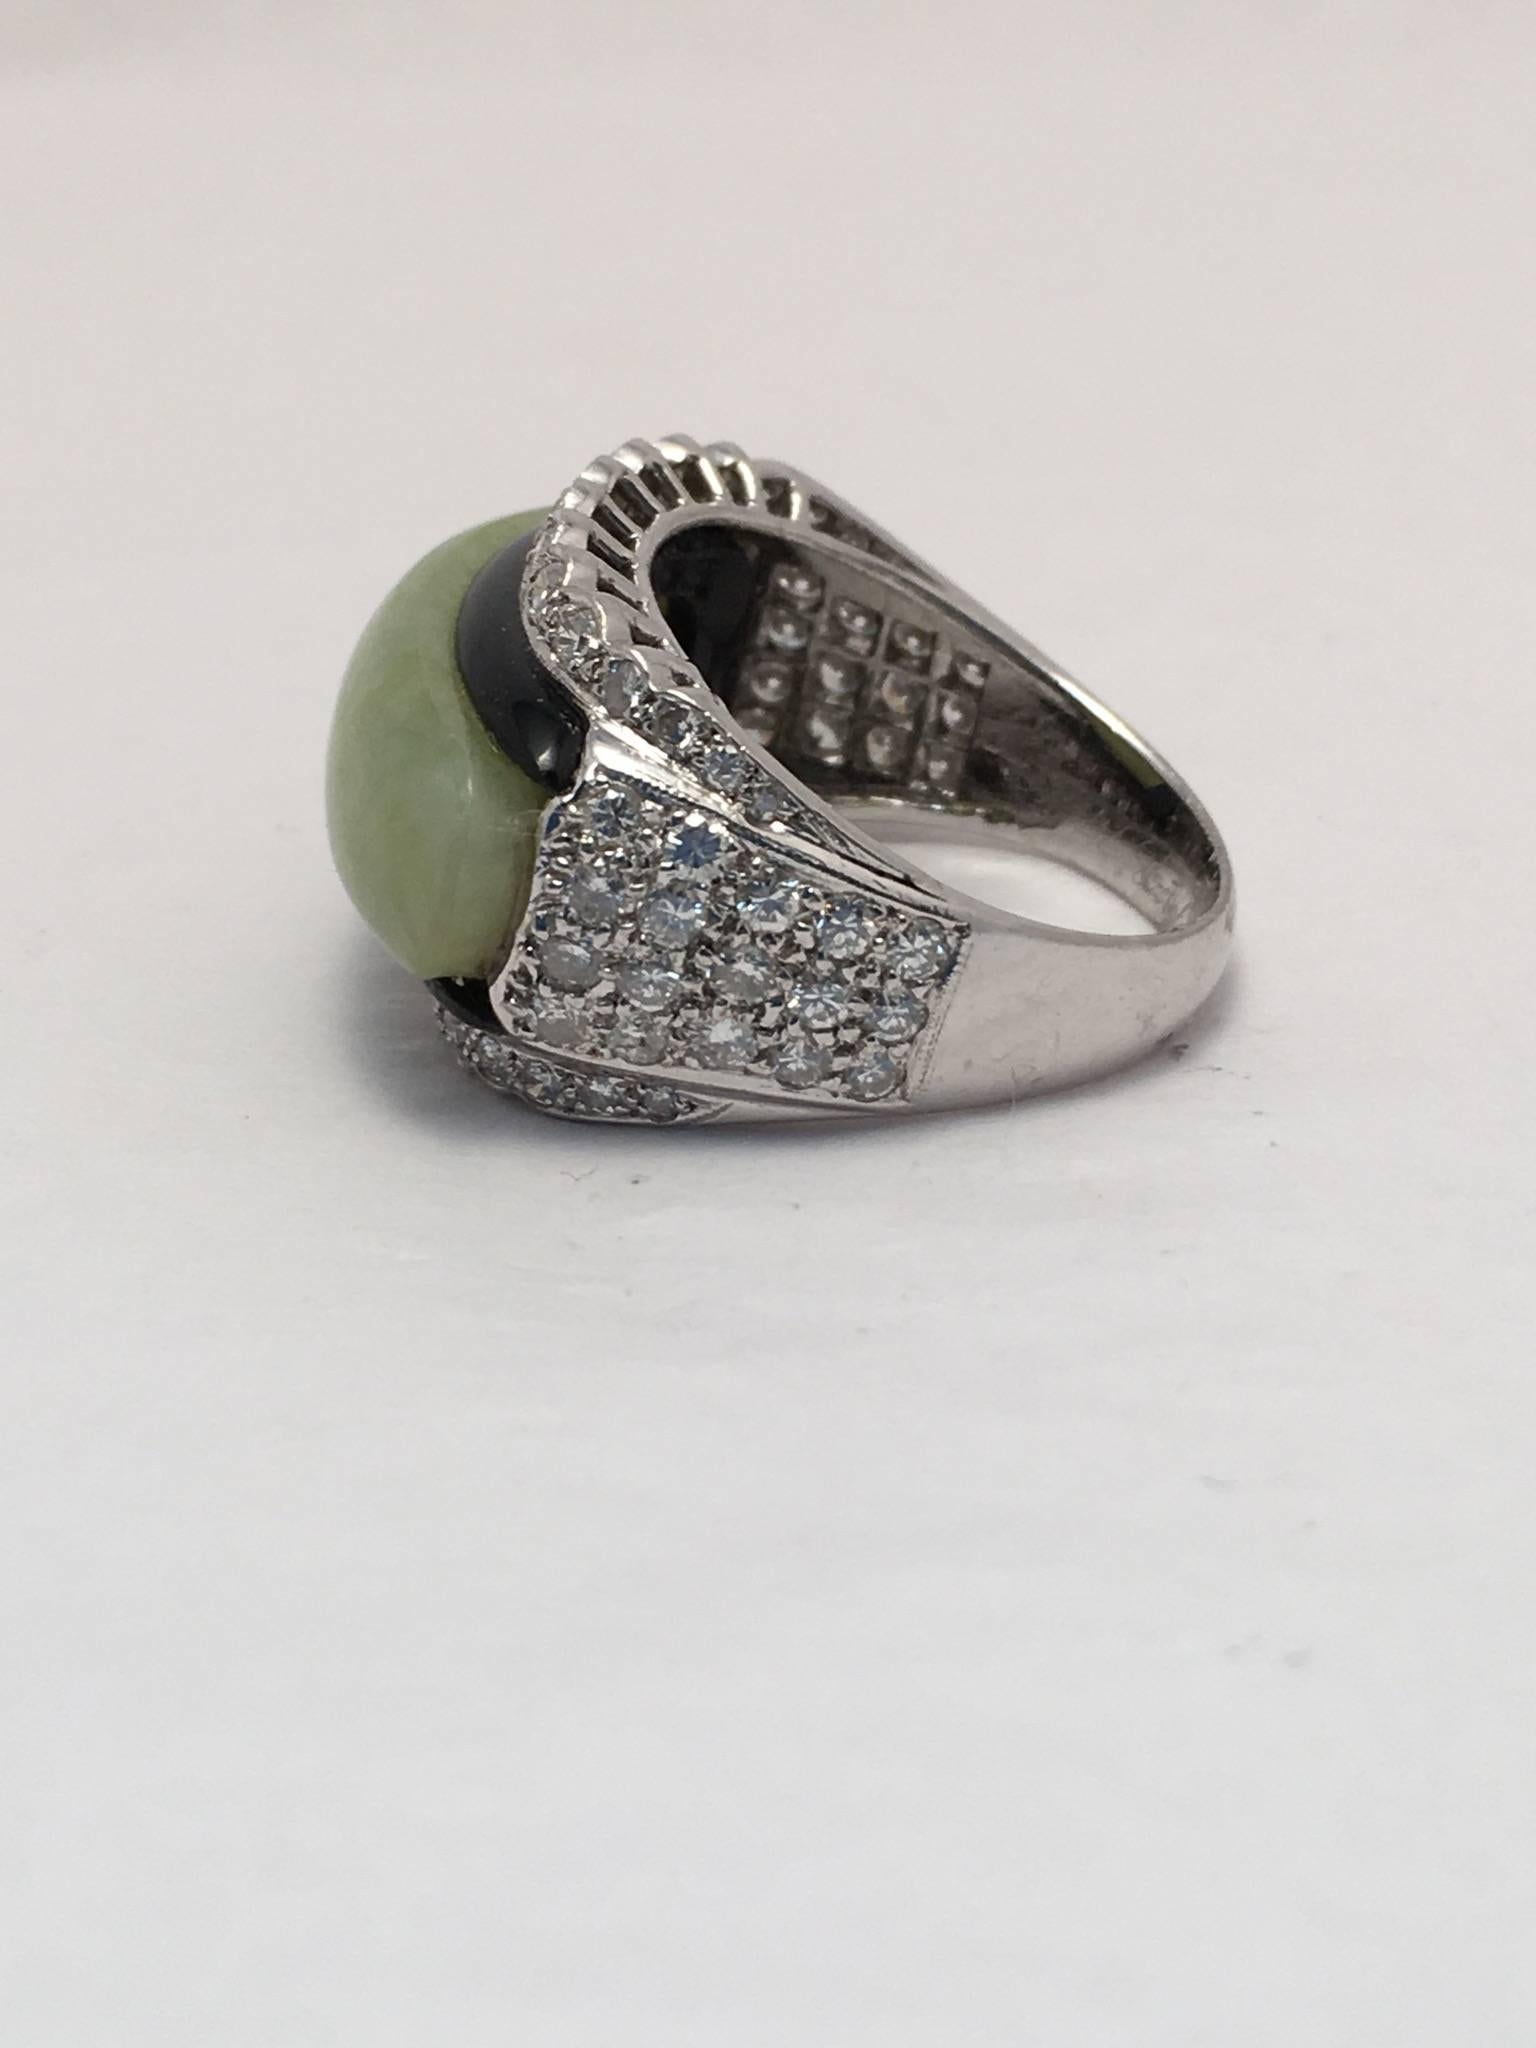 Platinum ring is set with onyx and jadeite jade surrounded by 64 round brilliant diamonds weighing approximately 1.28 ct. total weight.  